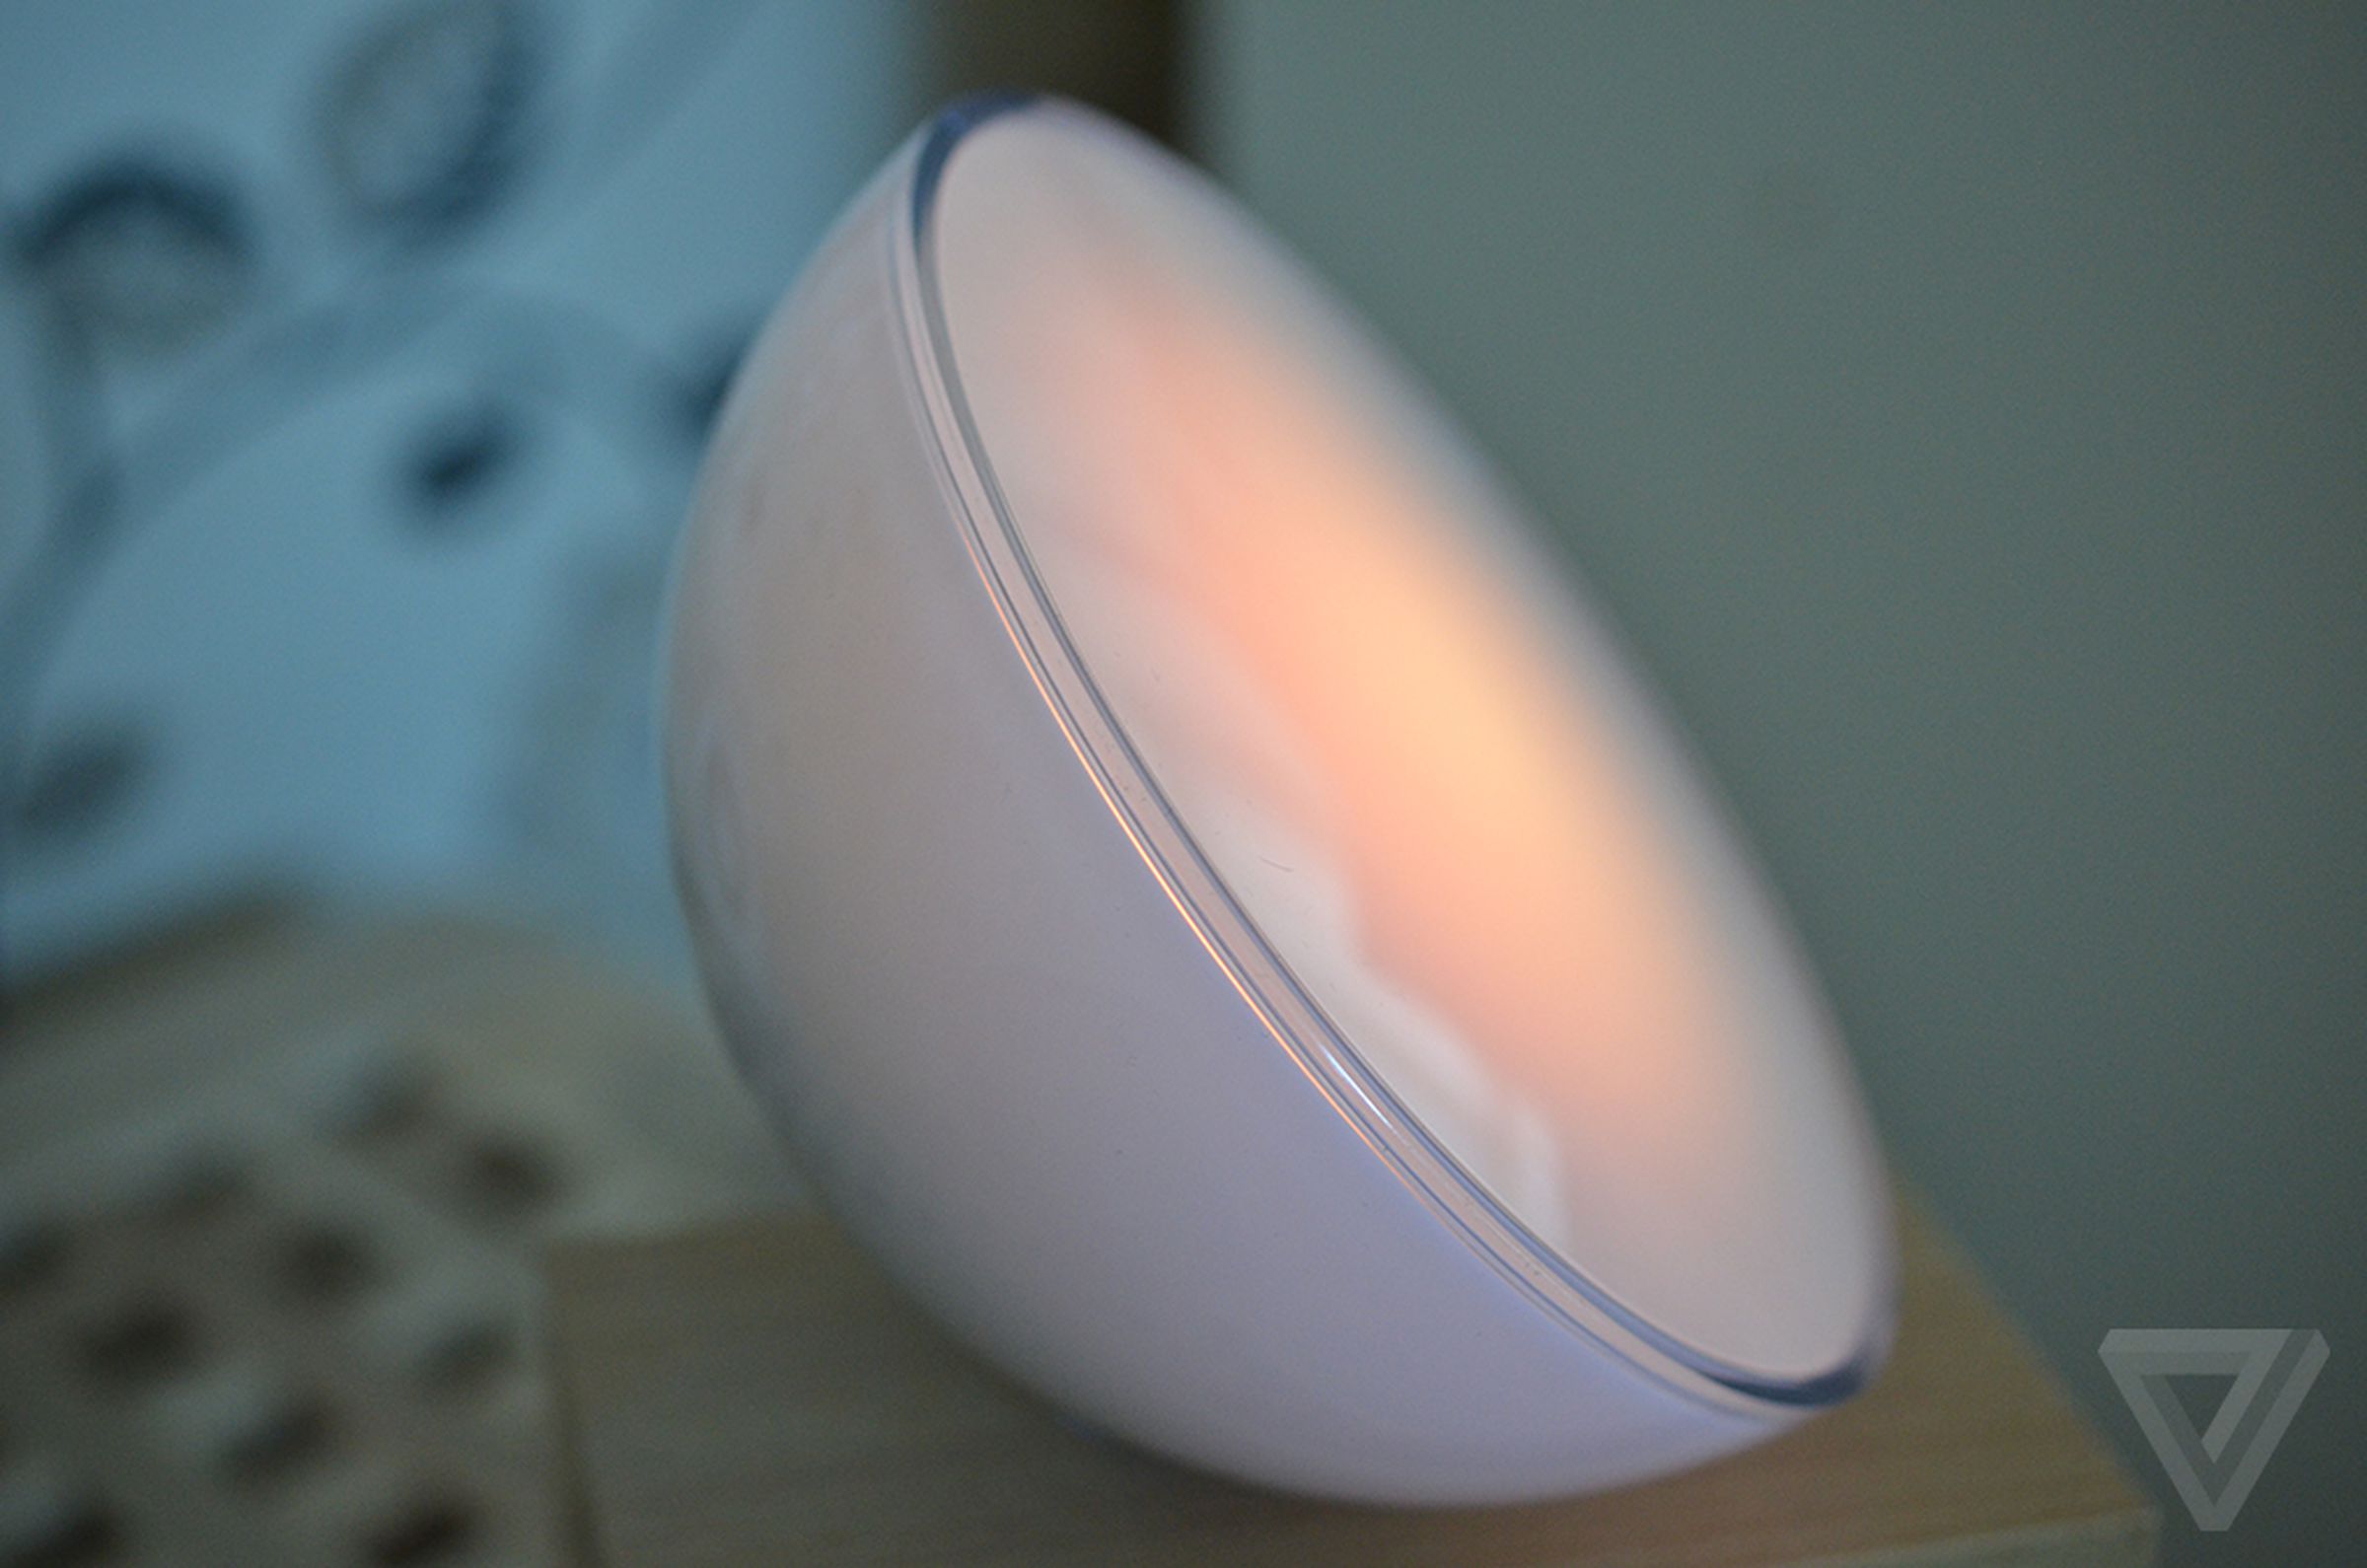 Philips Hue Go hands-on pictures